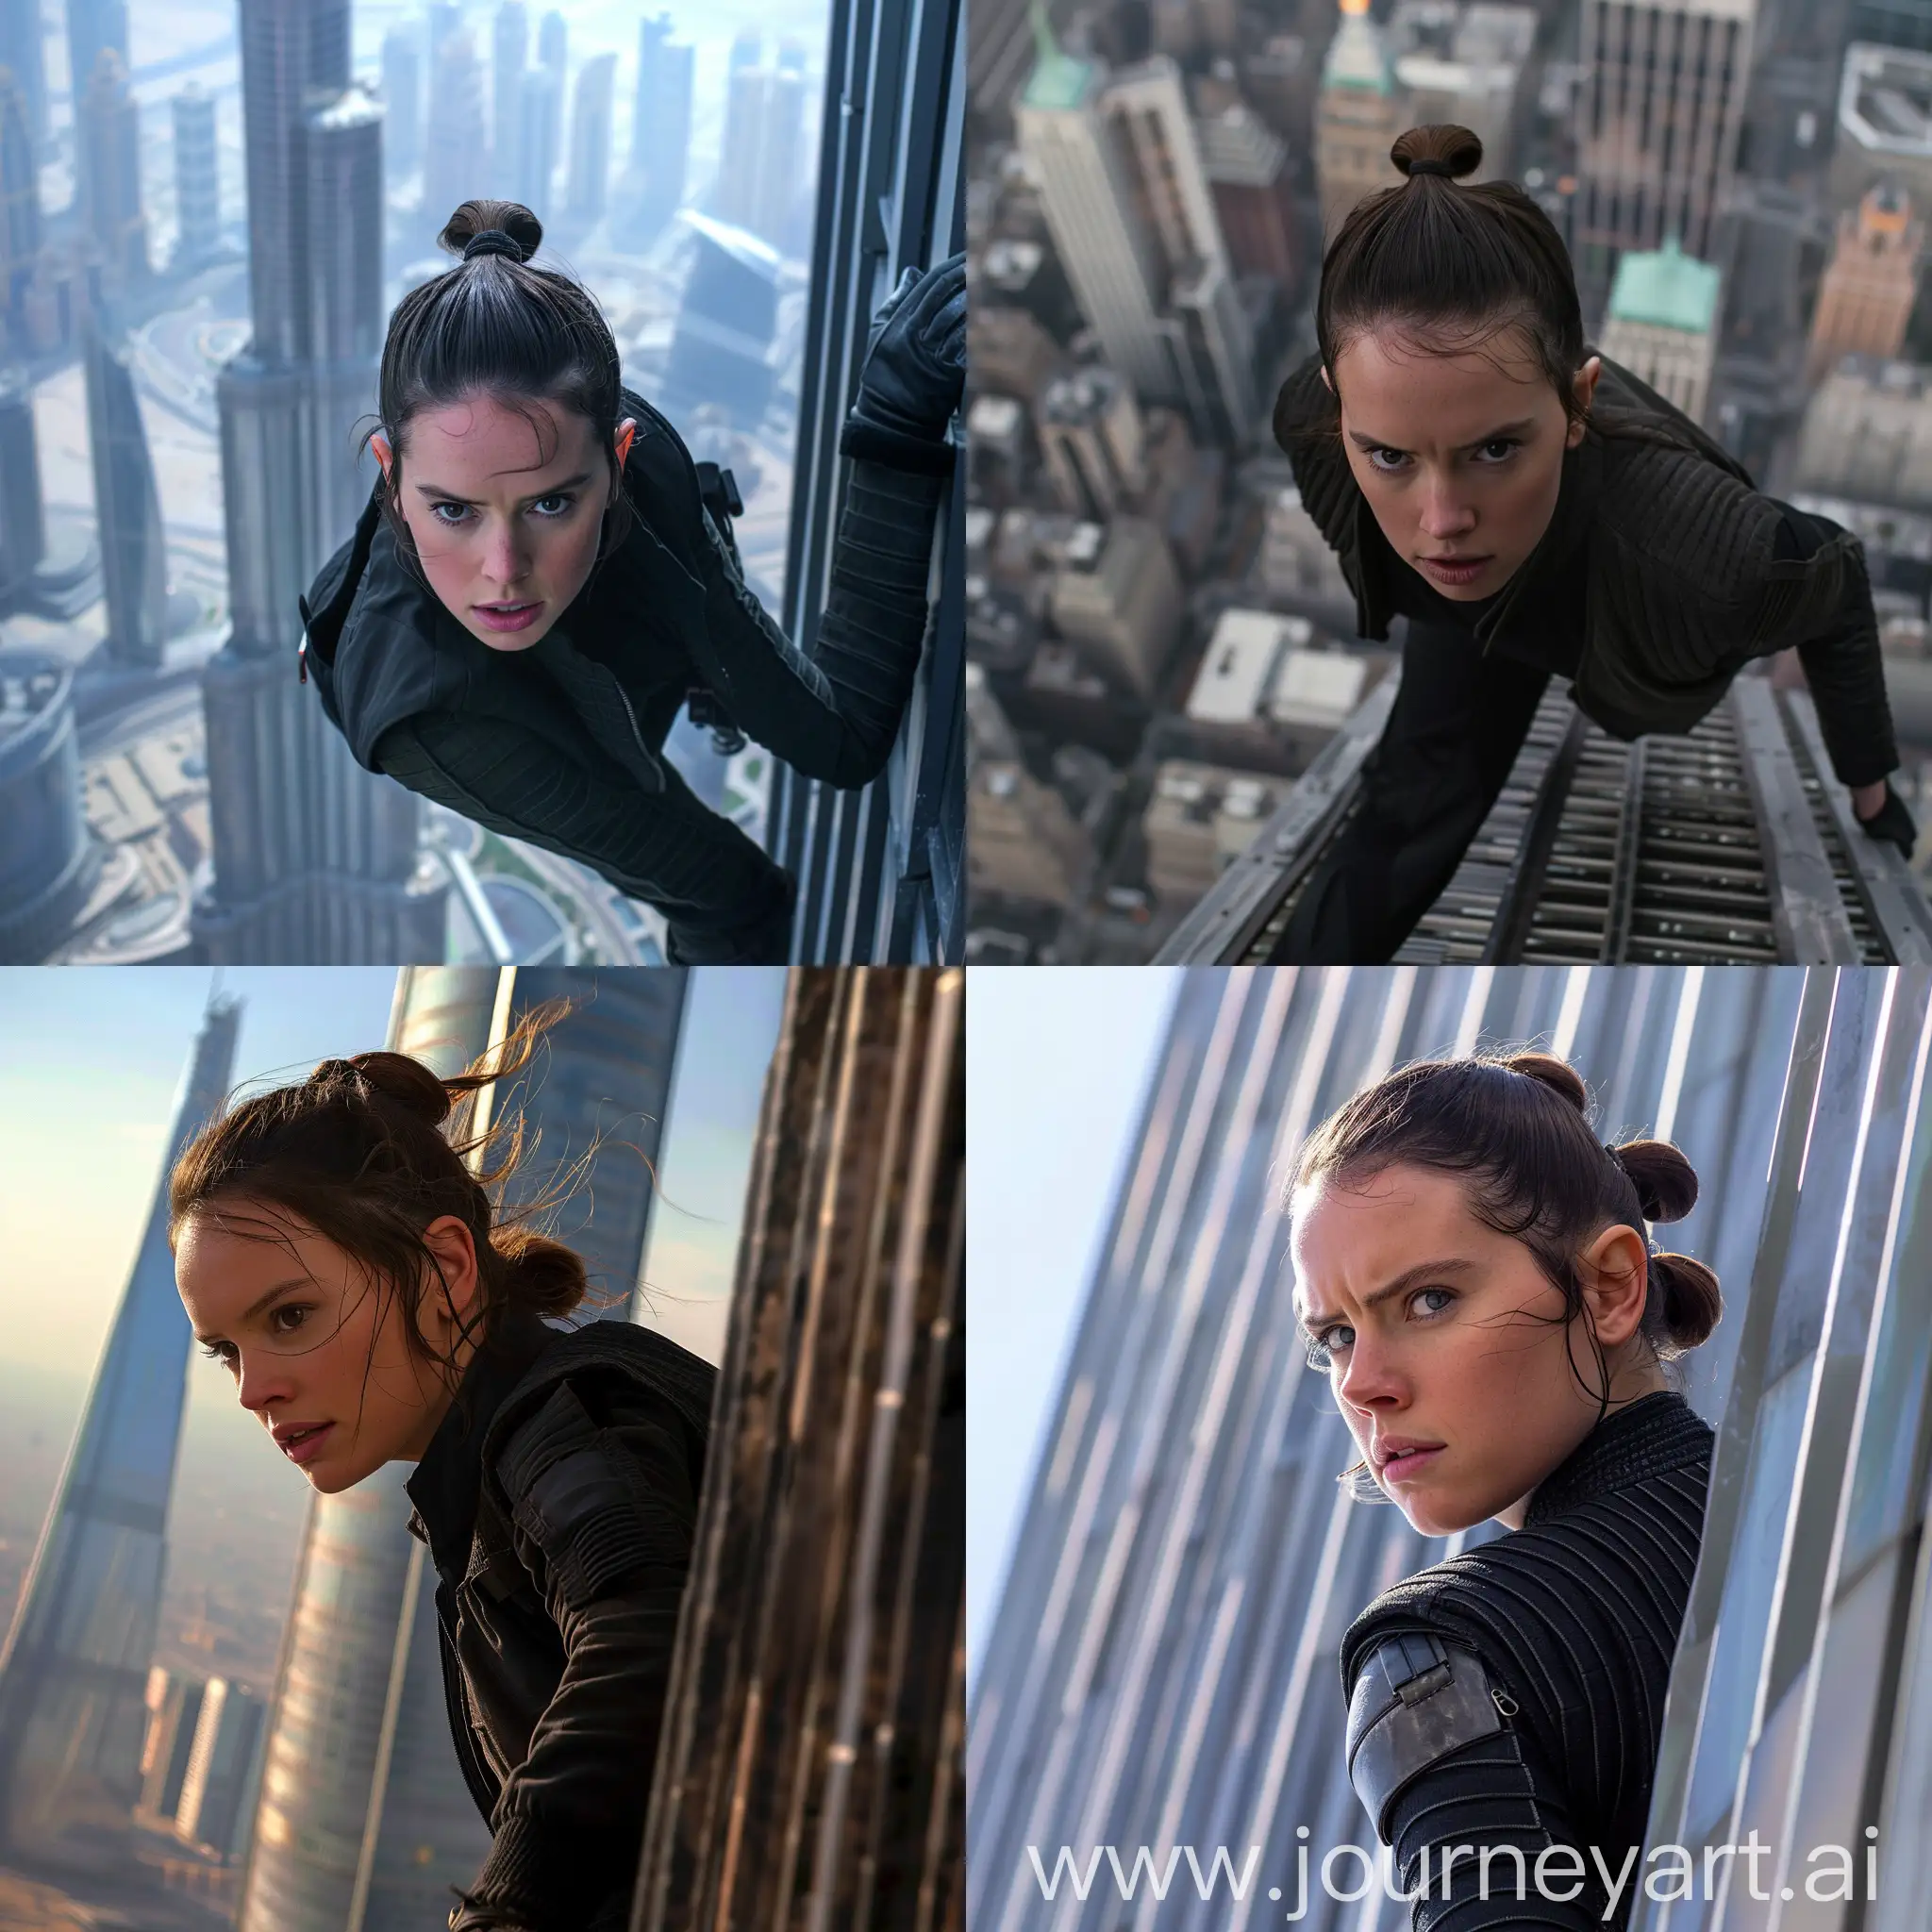 actress Daisy Ridley With Rey Skywalker's face, With Black jacket in iconic scenes from the films Mission Impossible, climbing the tallest building in the world, 8k resolution